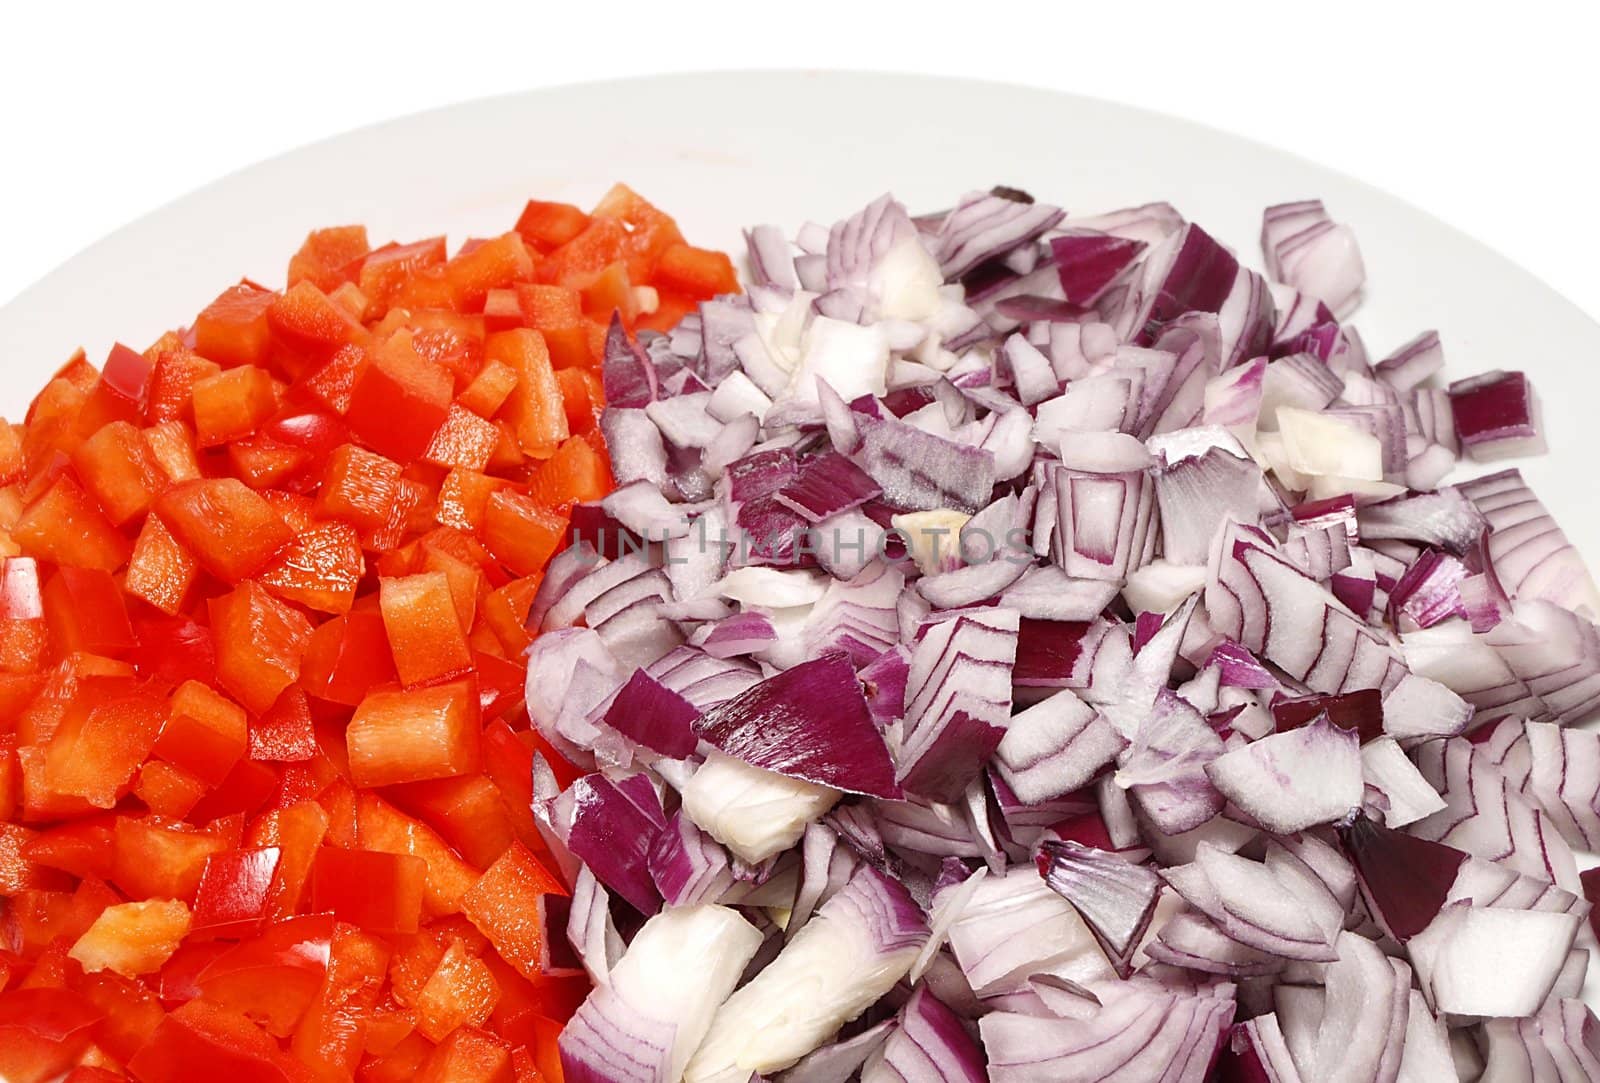 Red pepper and red onion sliced into dices on a white plate